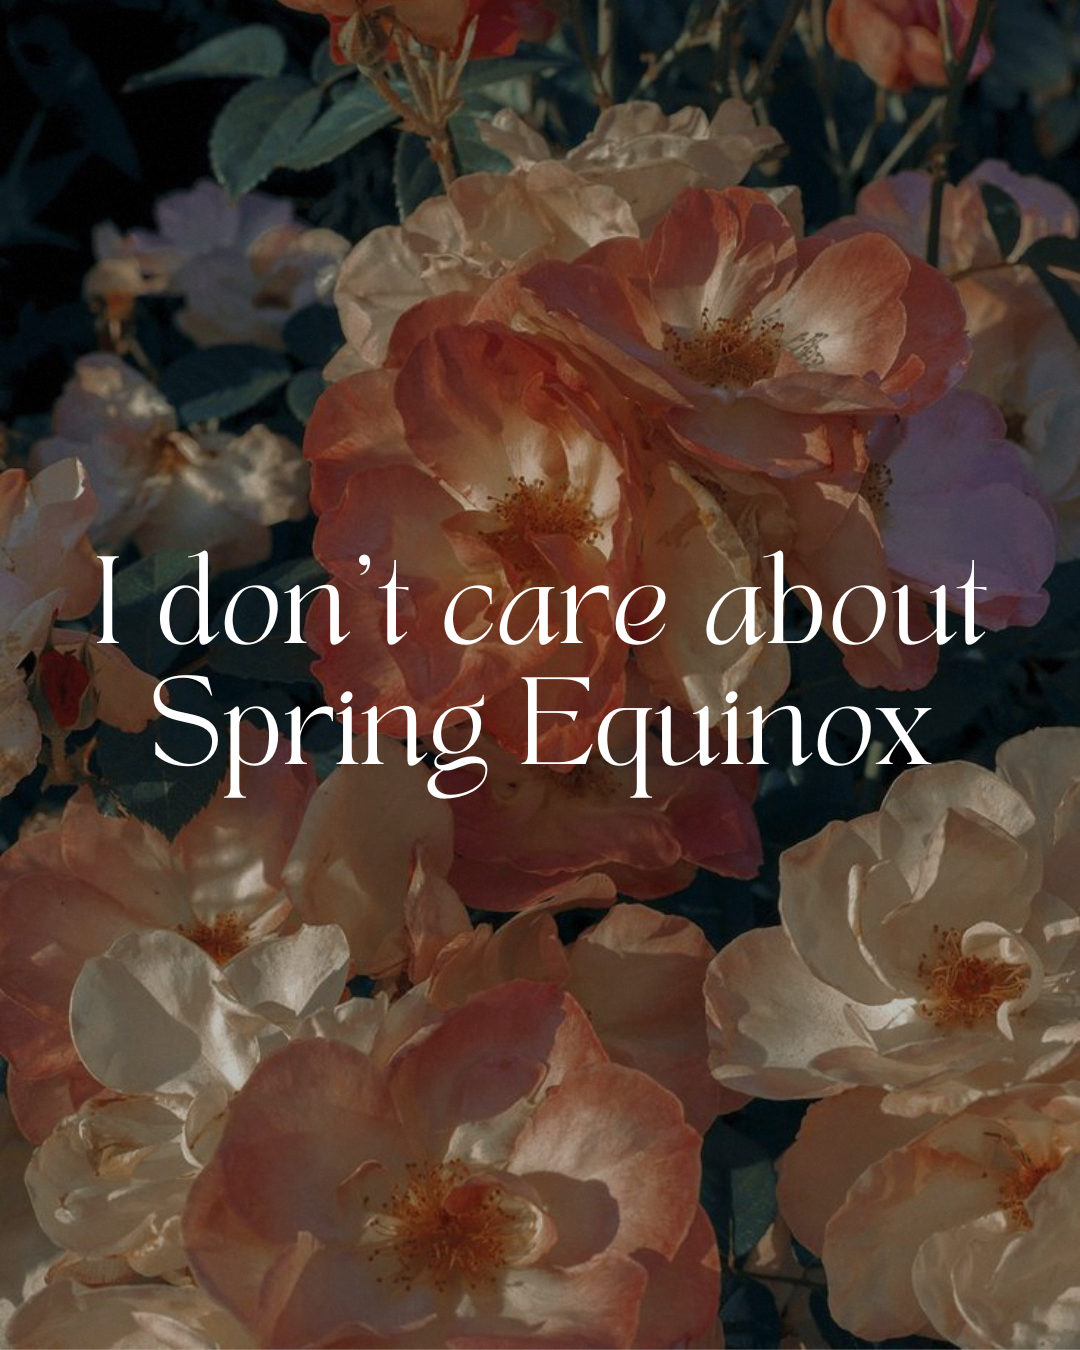 I don't care about Spring Equniox